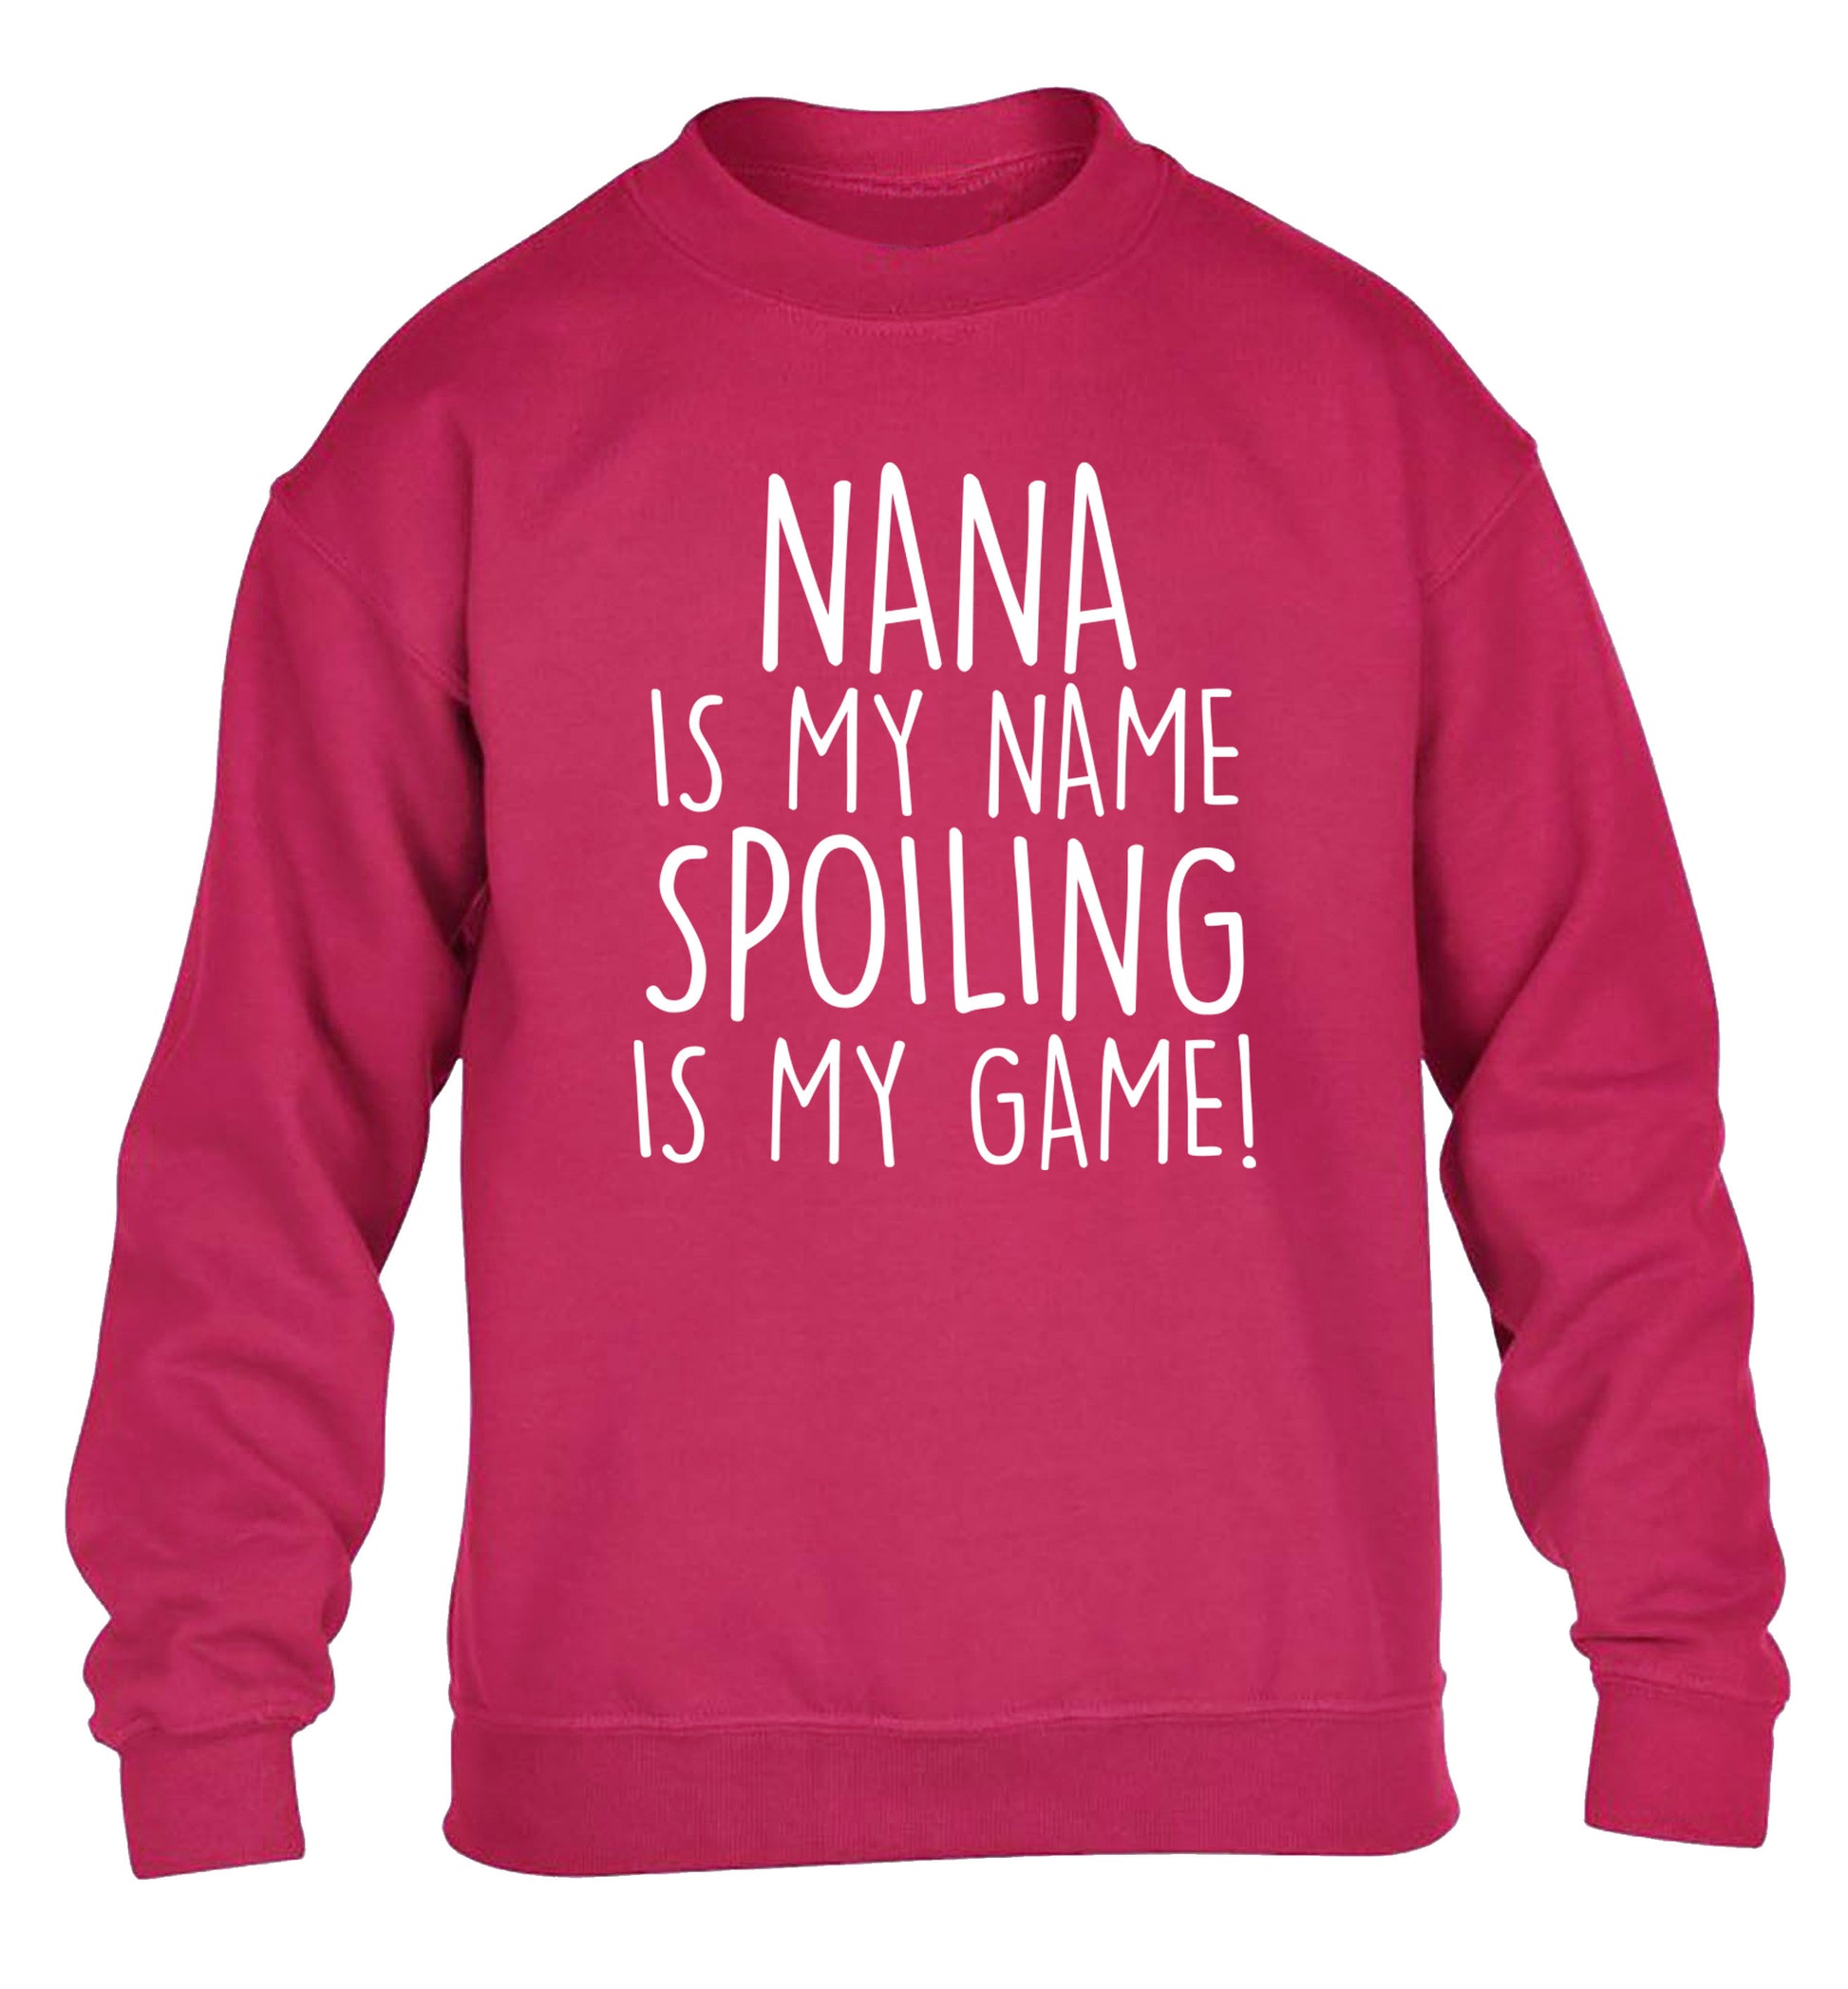 Nana is my name, spoiling is my game children's pink sweater 12-14 Years